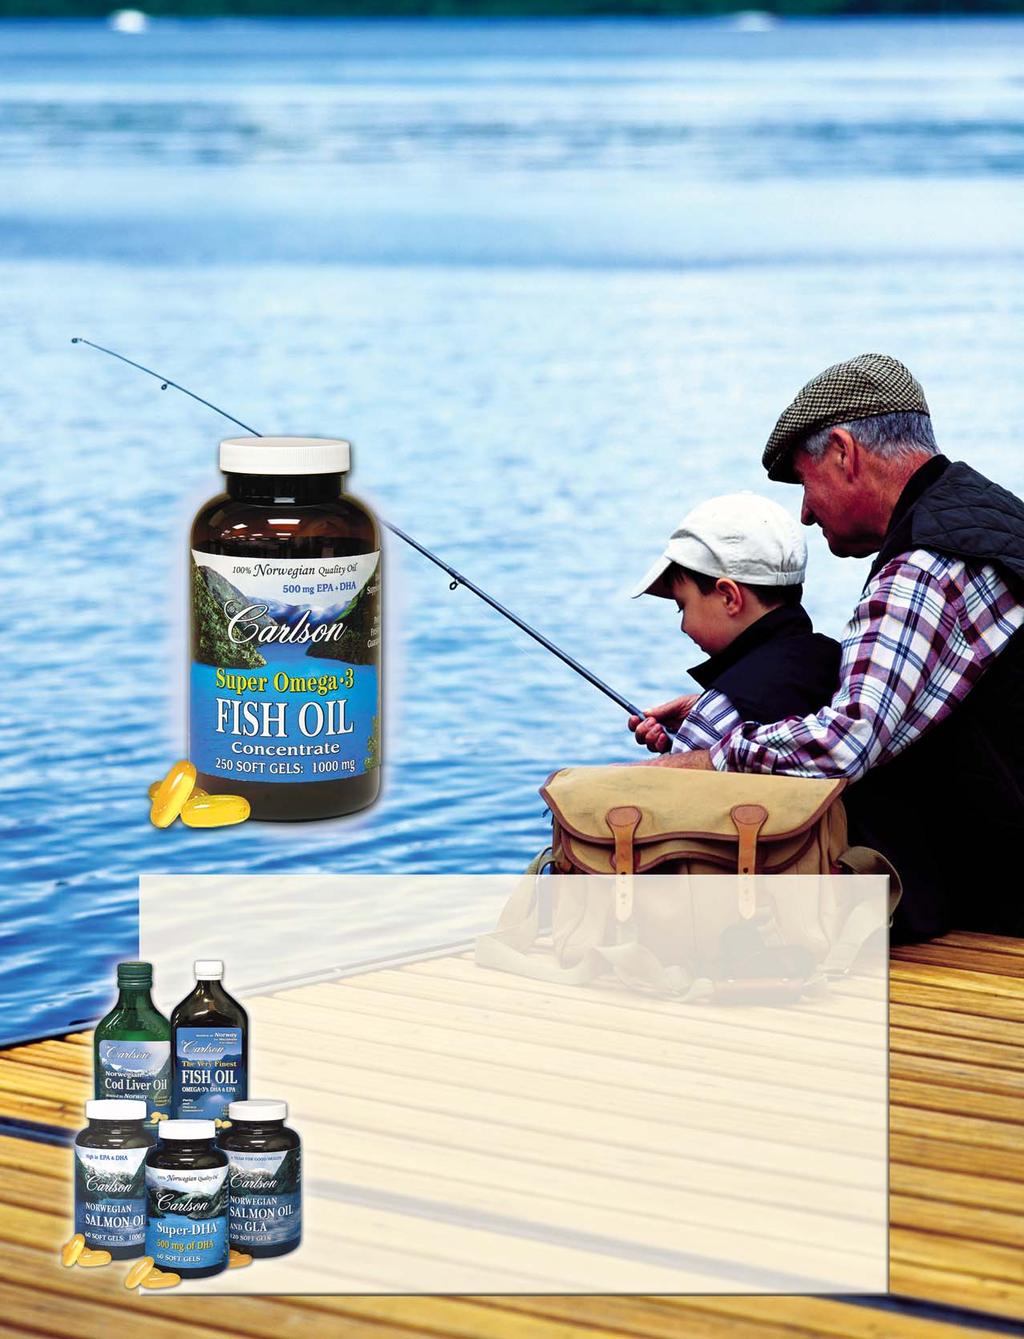 Catch Of The Day Carlson Fish Oil With Omega-3 s Support Healthy Heart, Brain, Nerves, Vision and Joints! C arlson Fish Oils are the next best thing to eating fish every day.